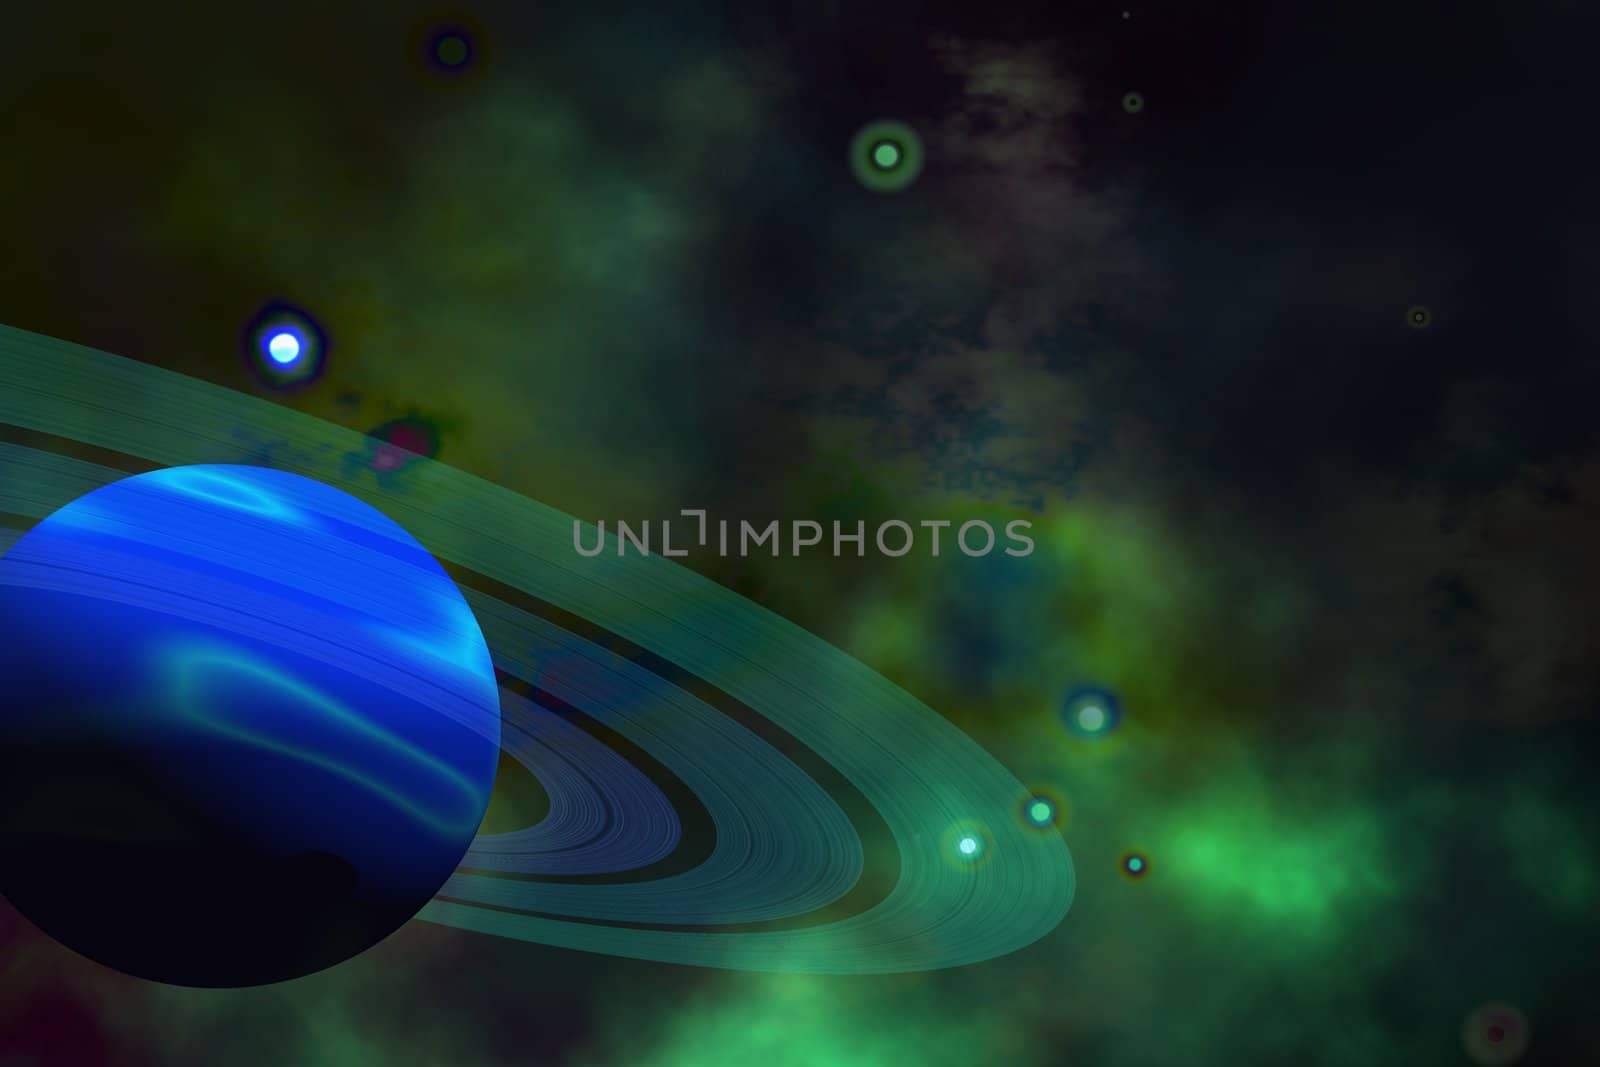 A blue ringed planet and nearby stars.